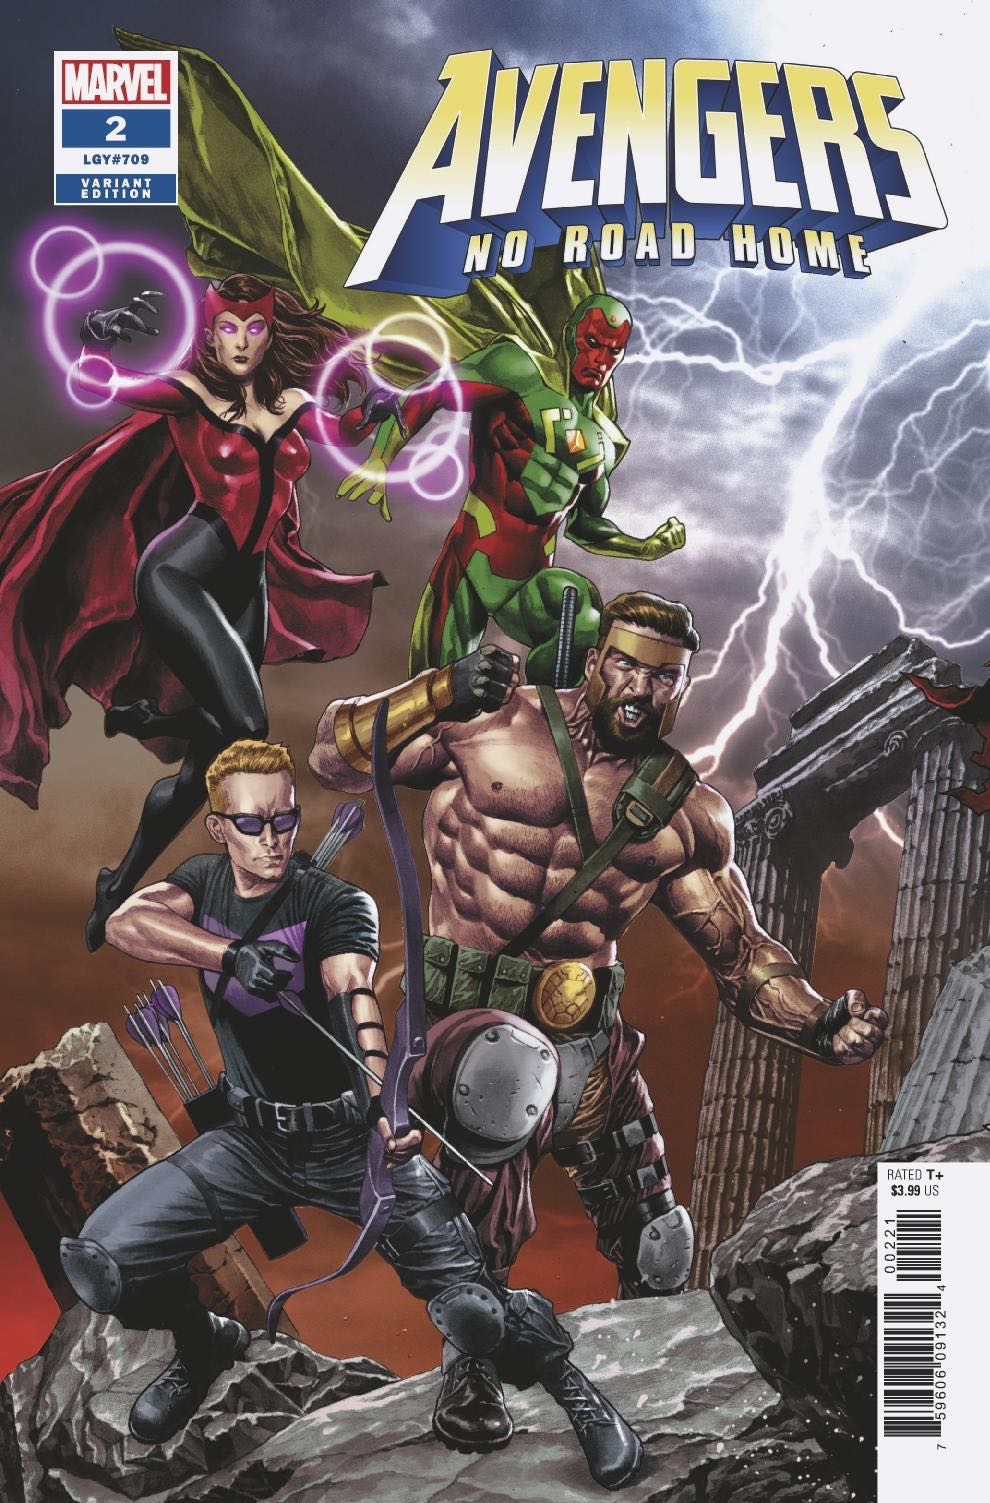 Marvel Preview: Avengers: No Road Home #2